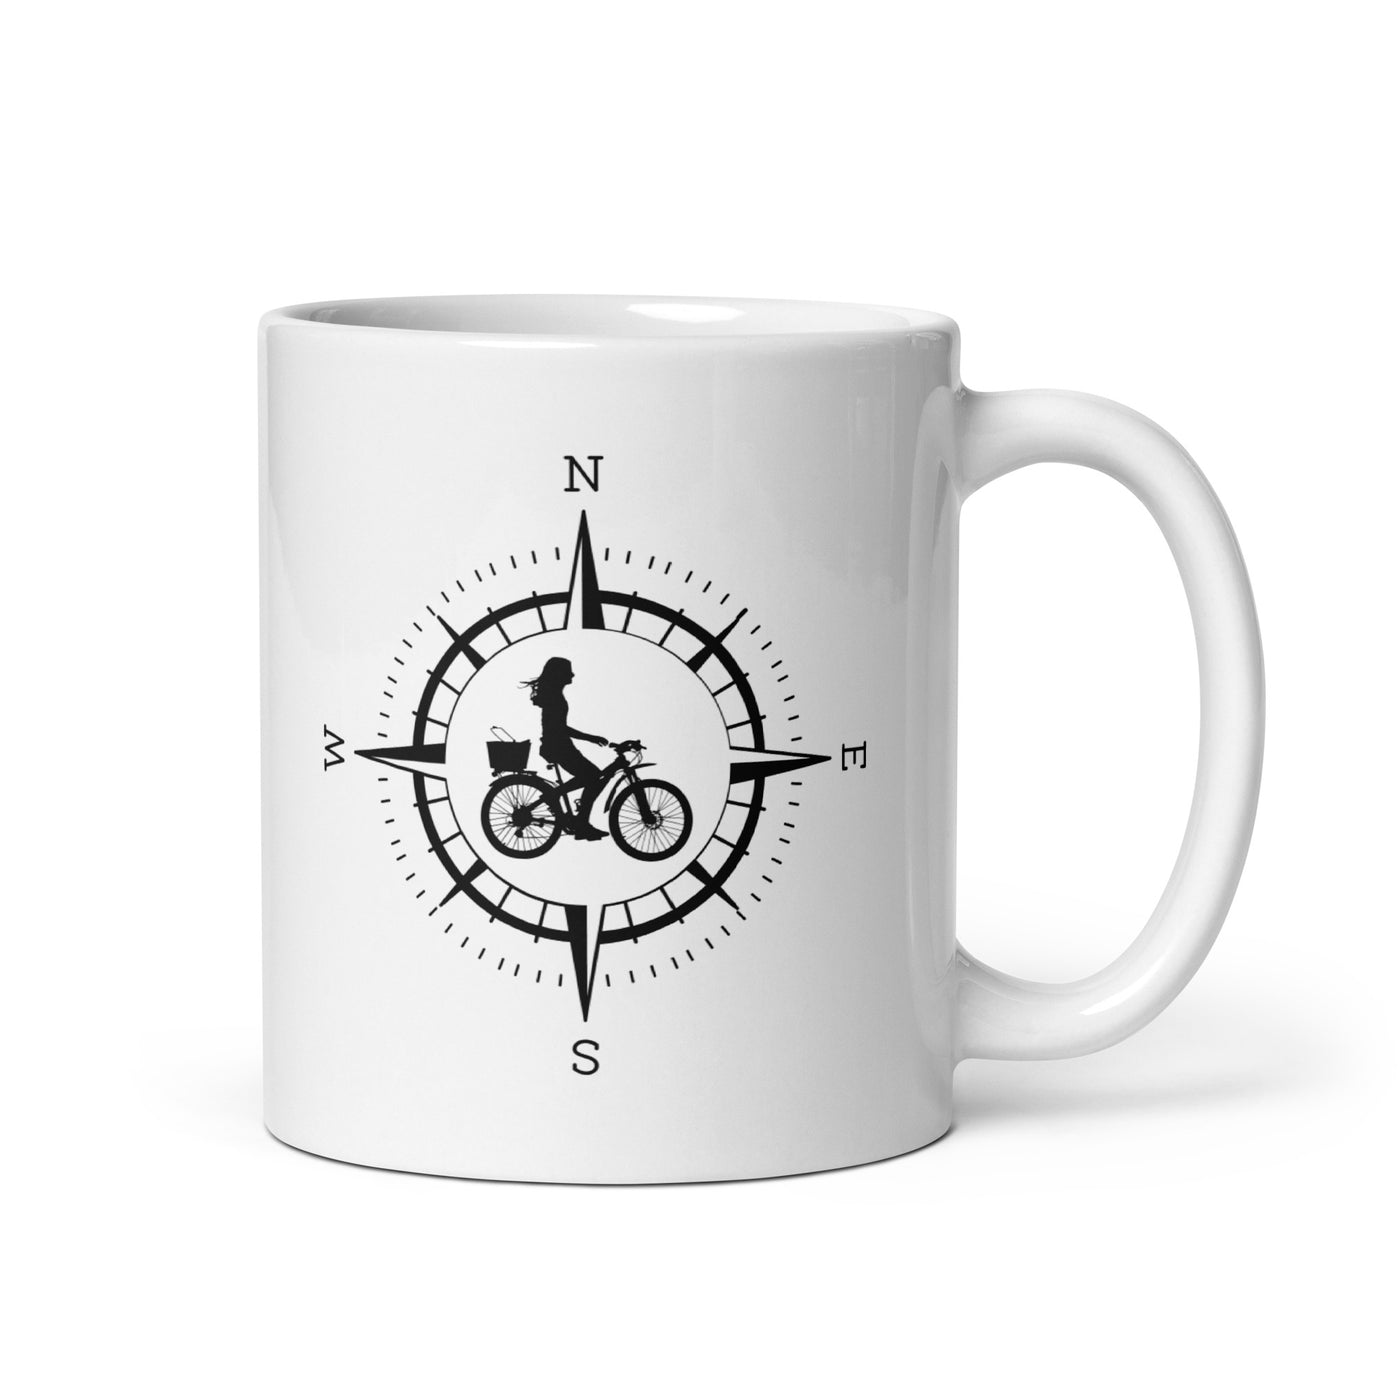 Compass And Cycling - Tasse fahrrad